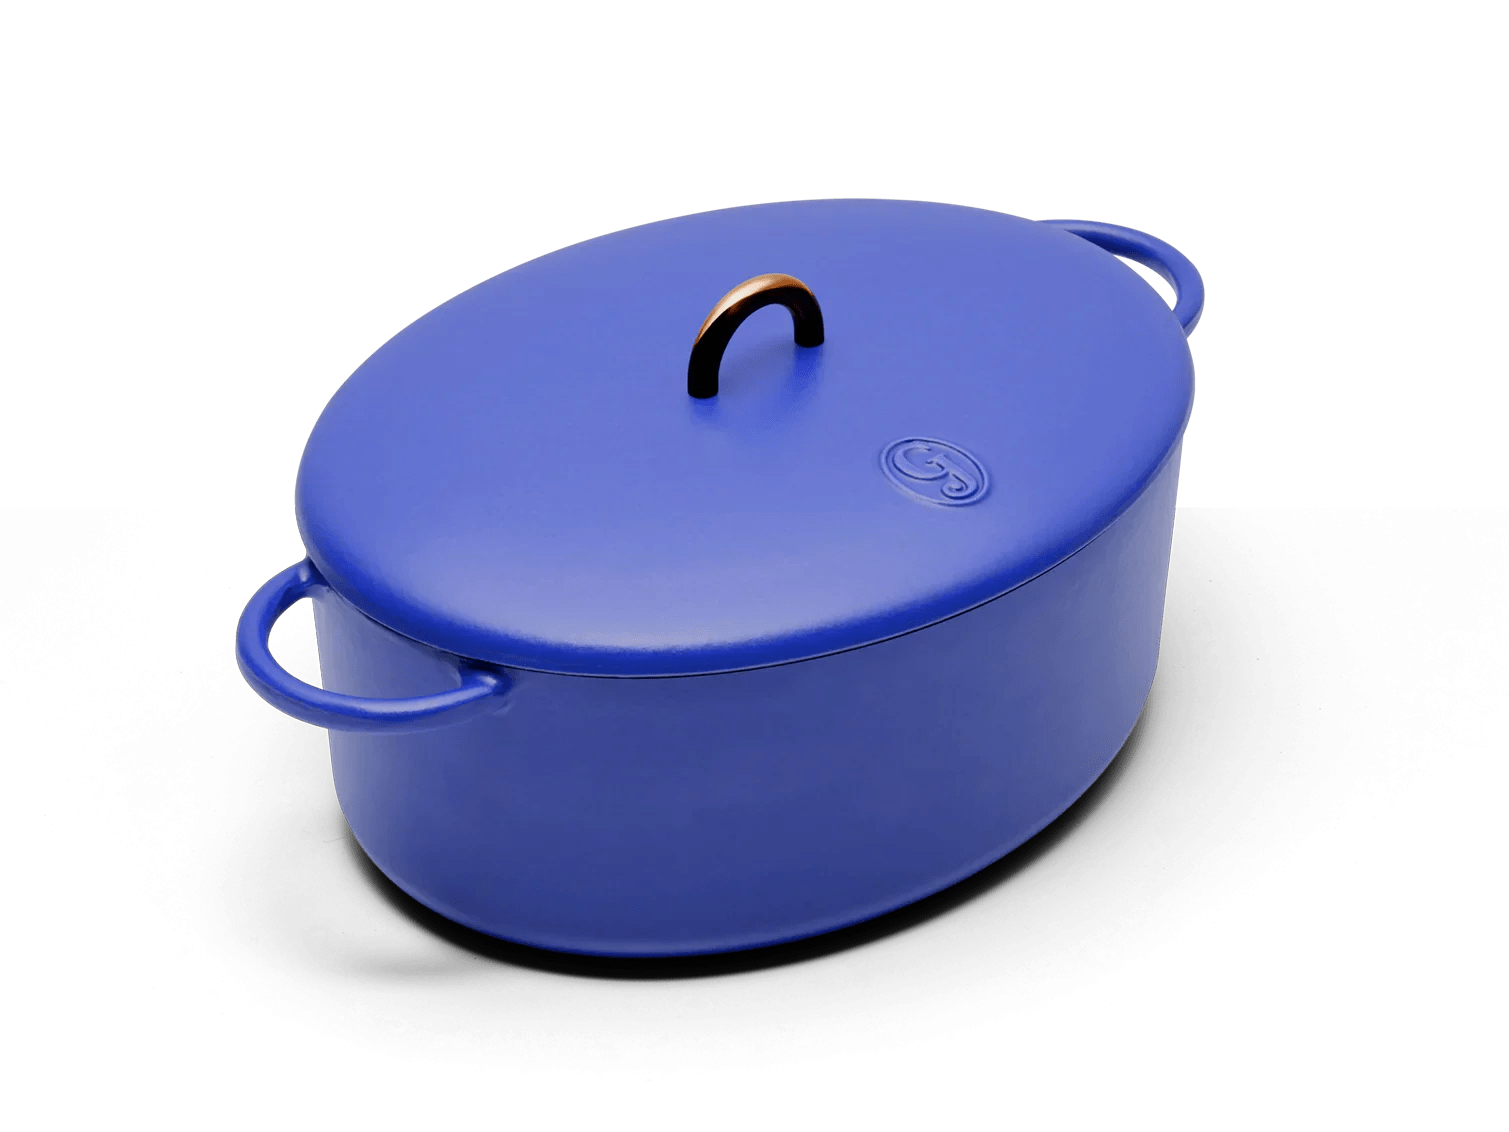 the dutchess dutch oven from great jones, best sister in law gifts